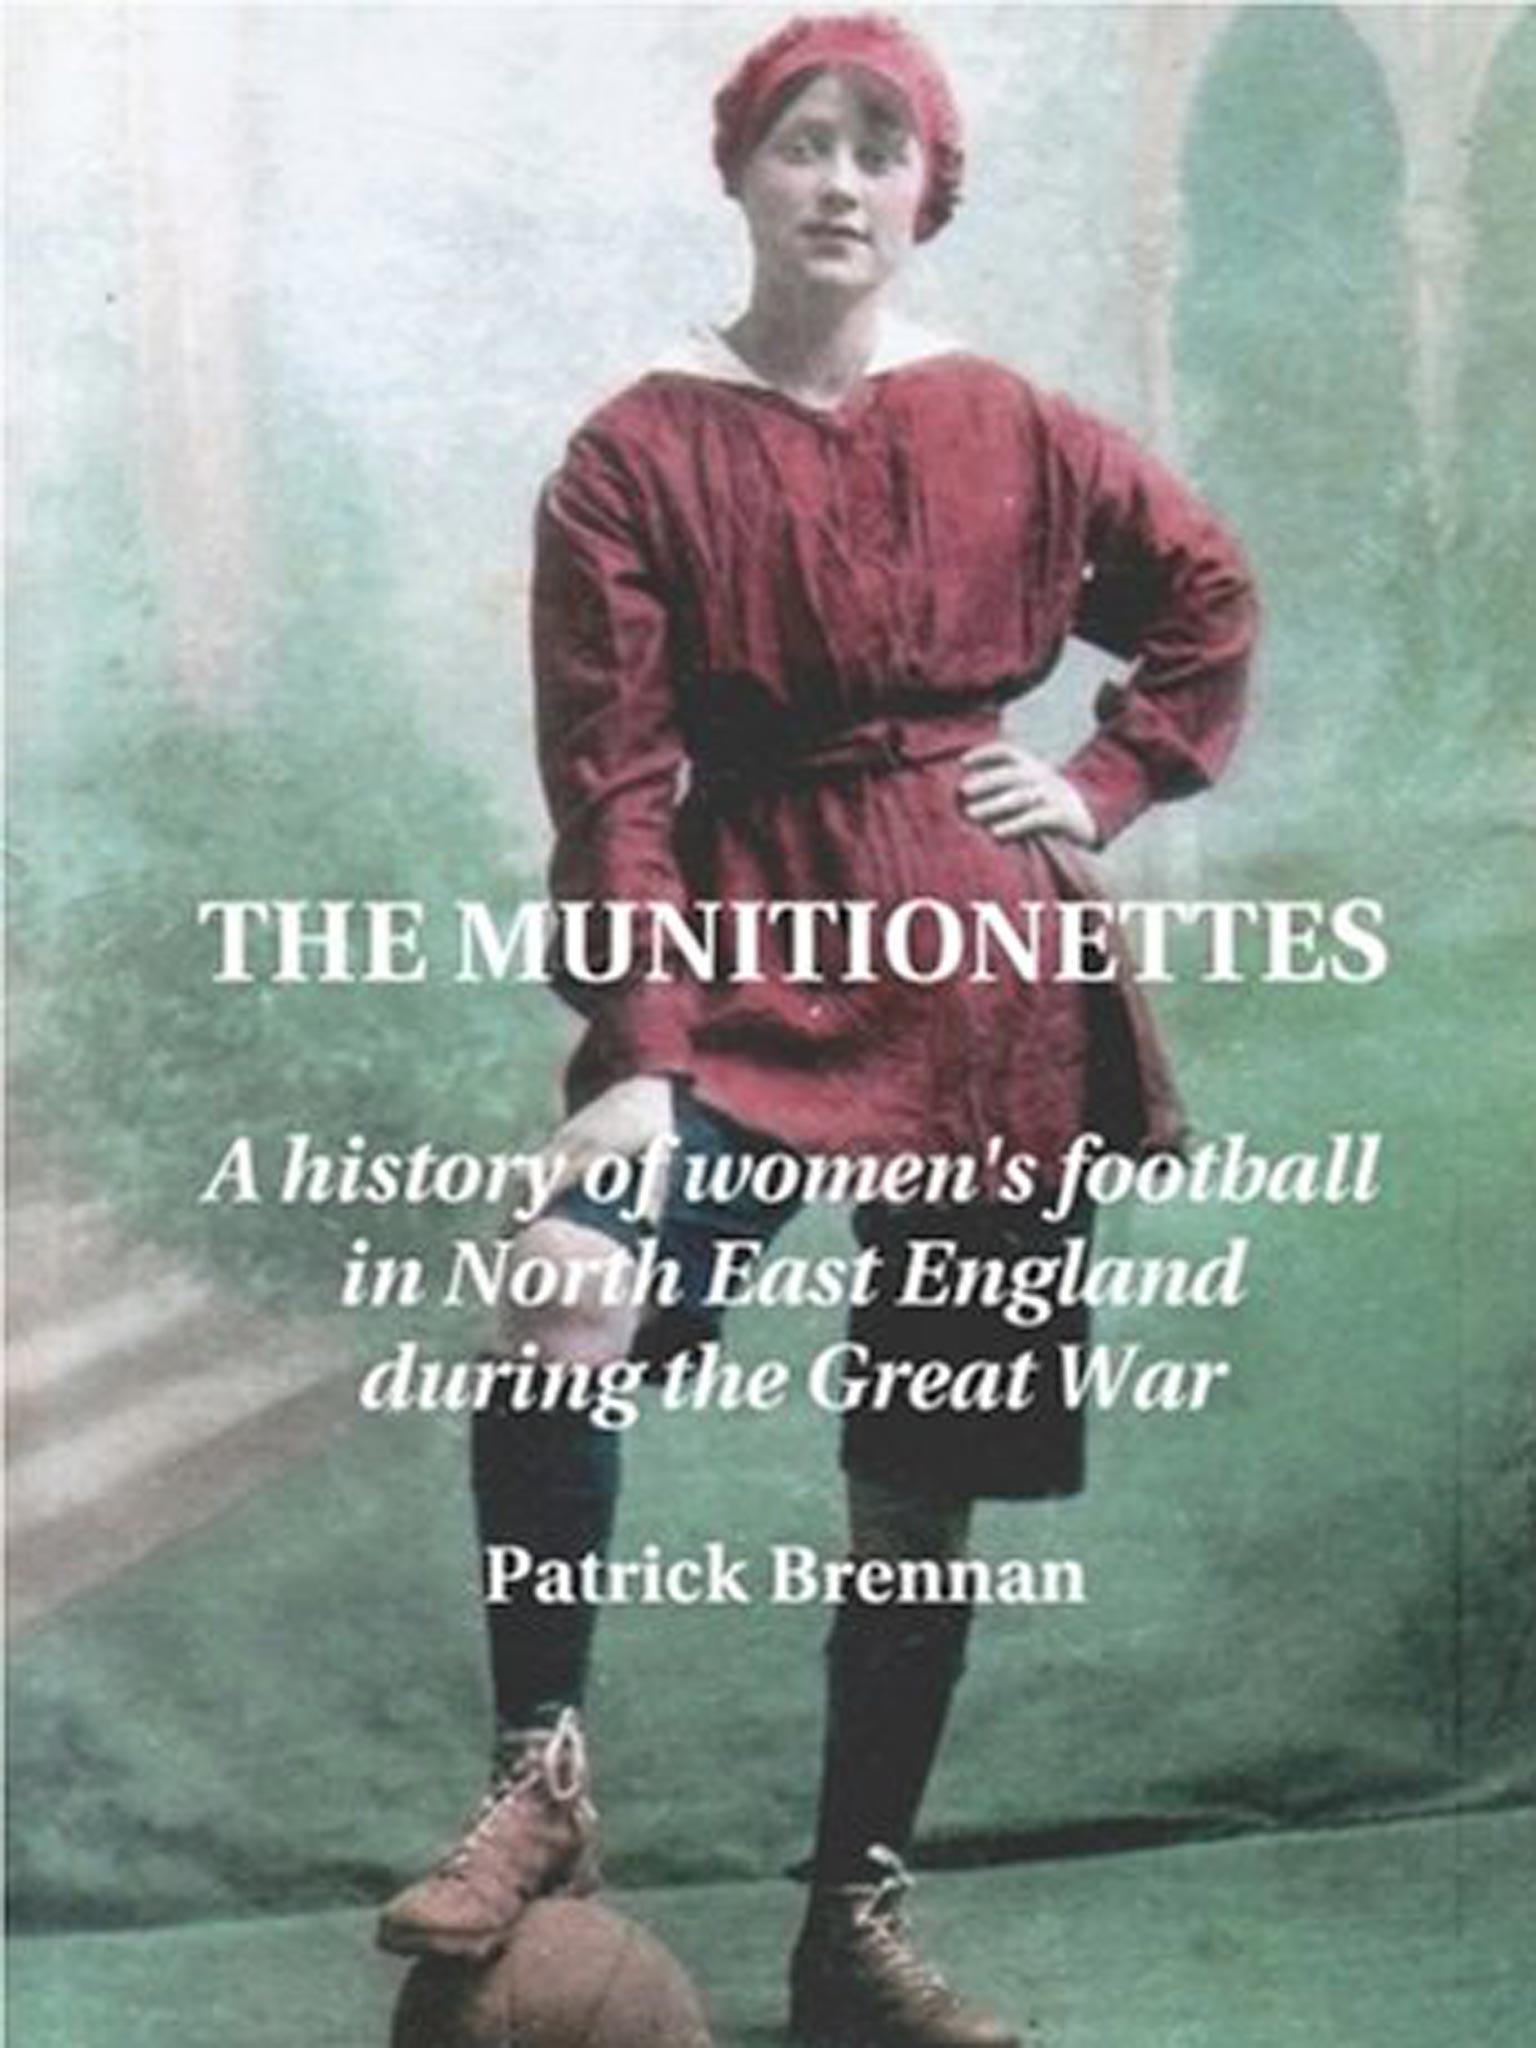 Patrick Brennan's book 'The Munitionettes: A history of Women’s Football in the North-East during the First World War'